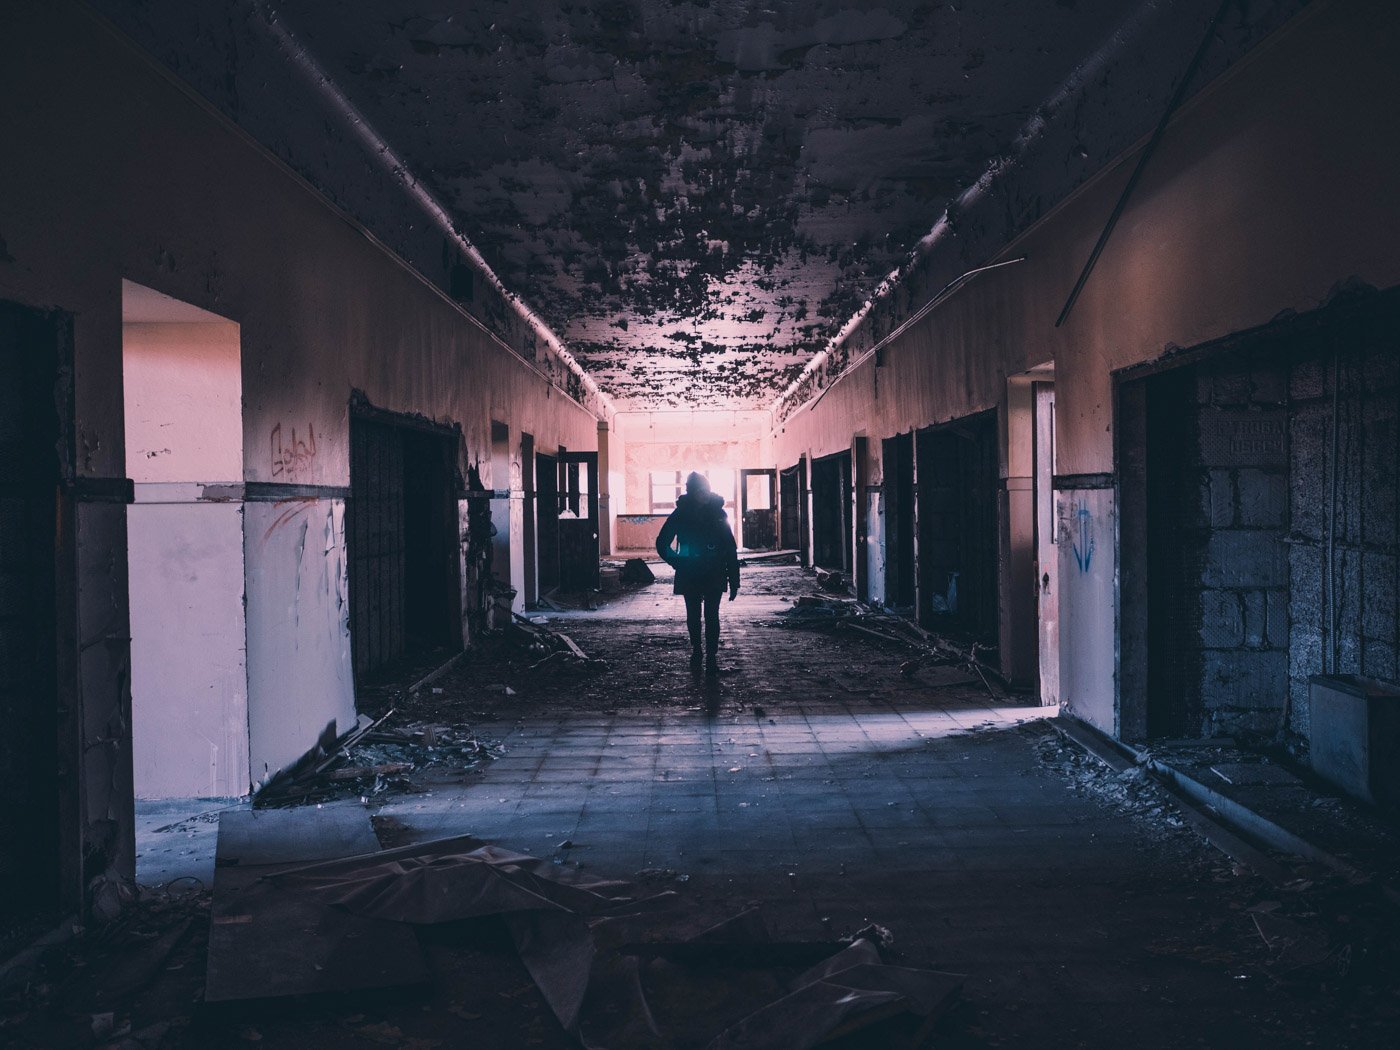 A person walking in an abandoned building hallway for urbex photography